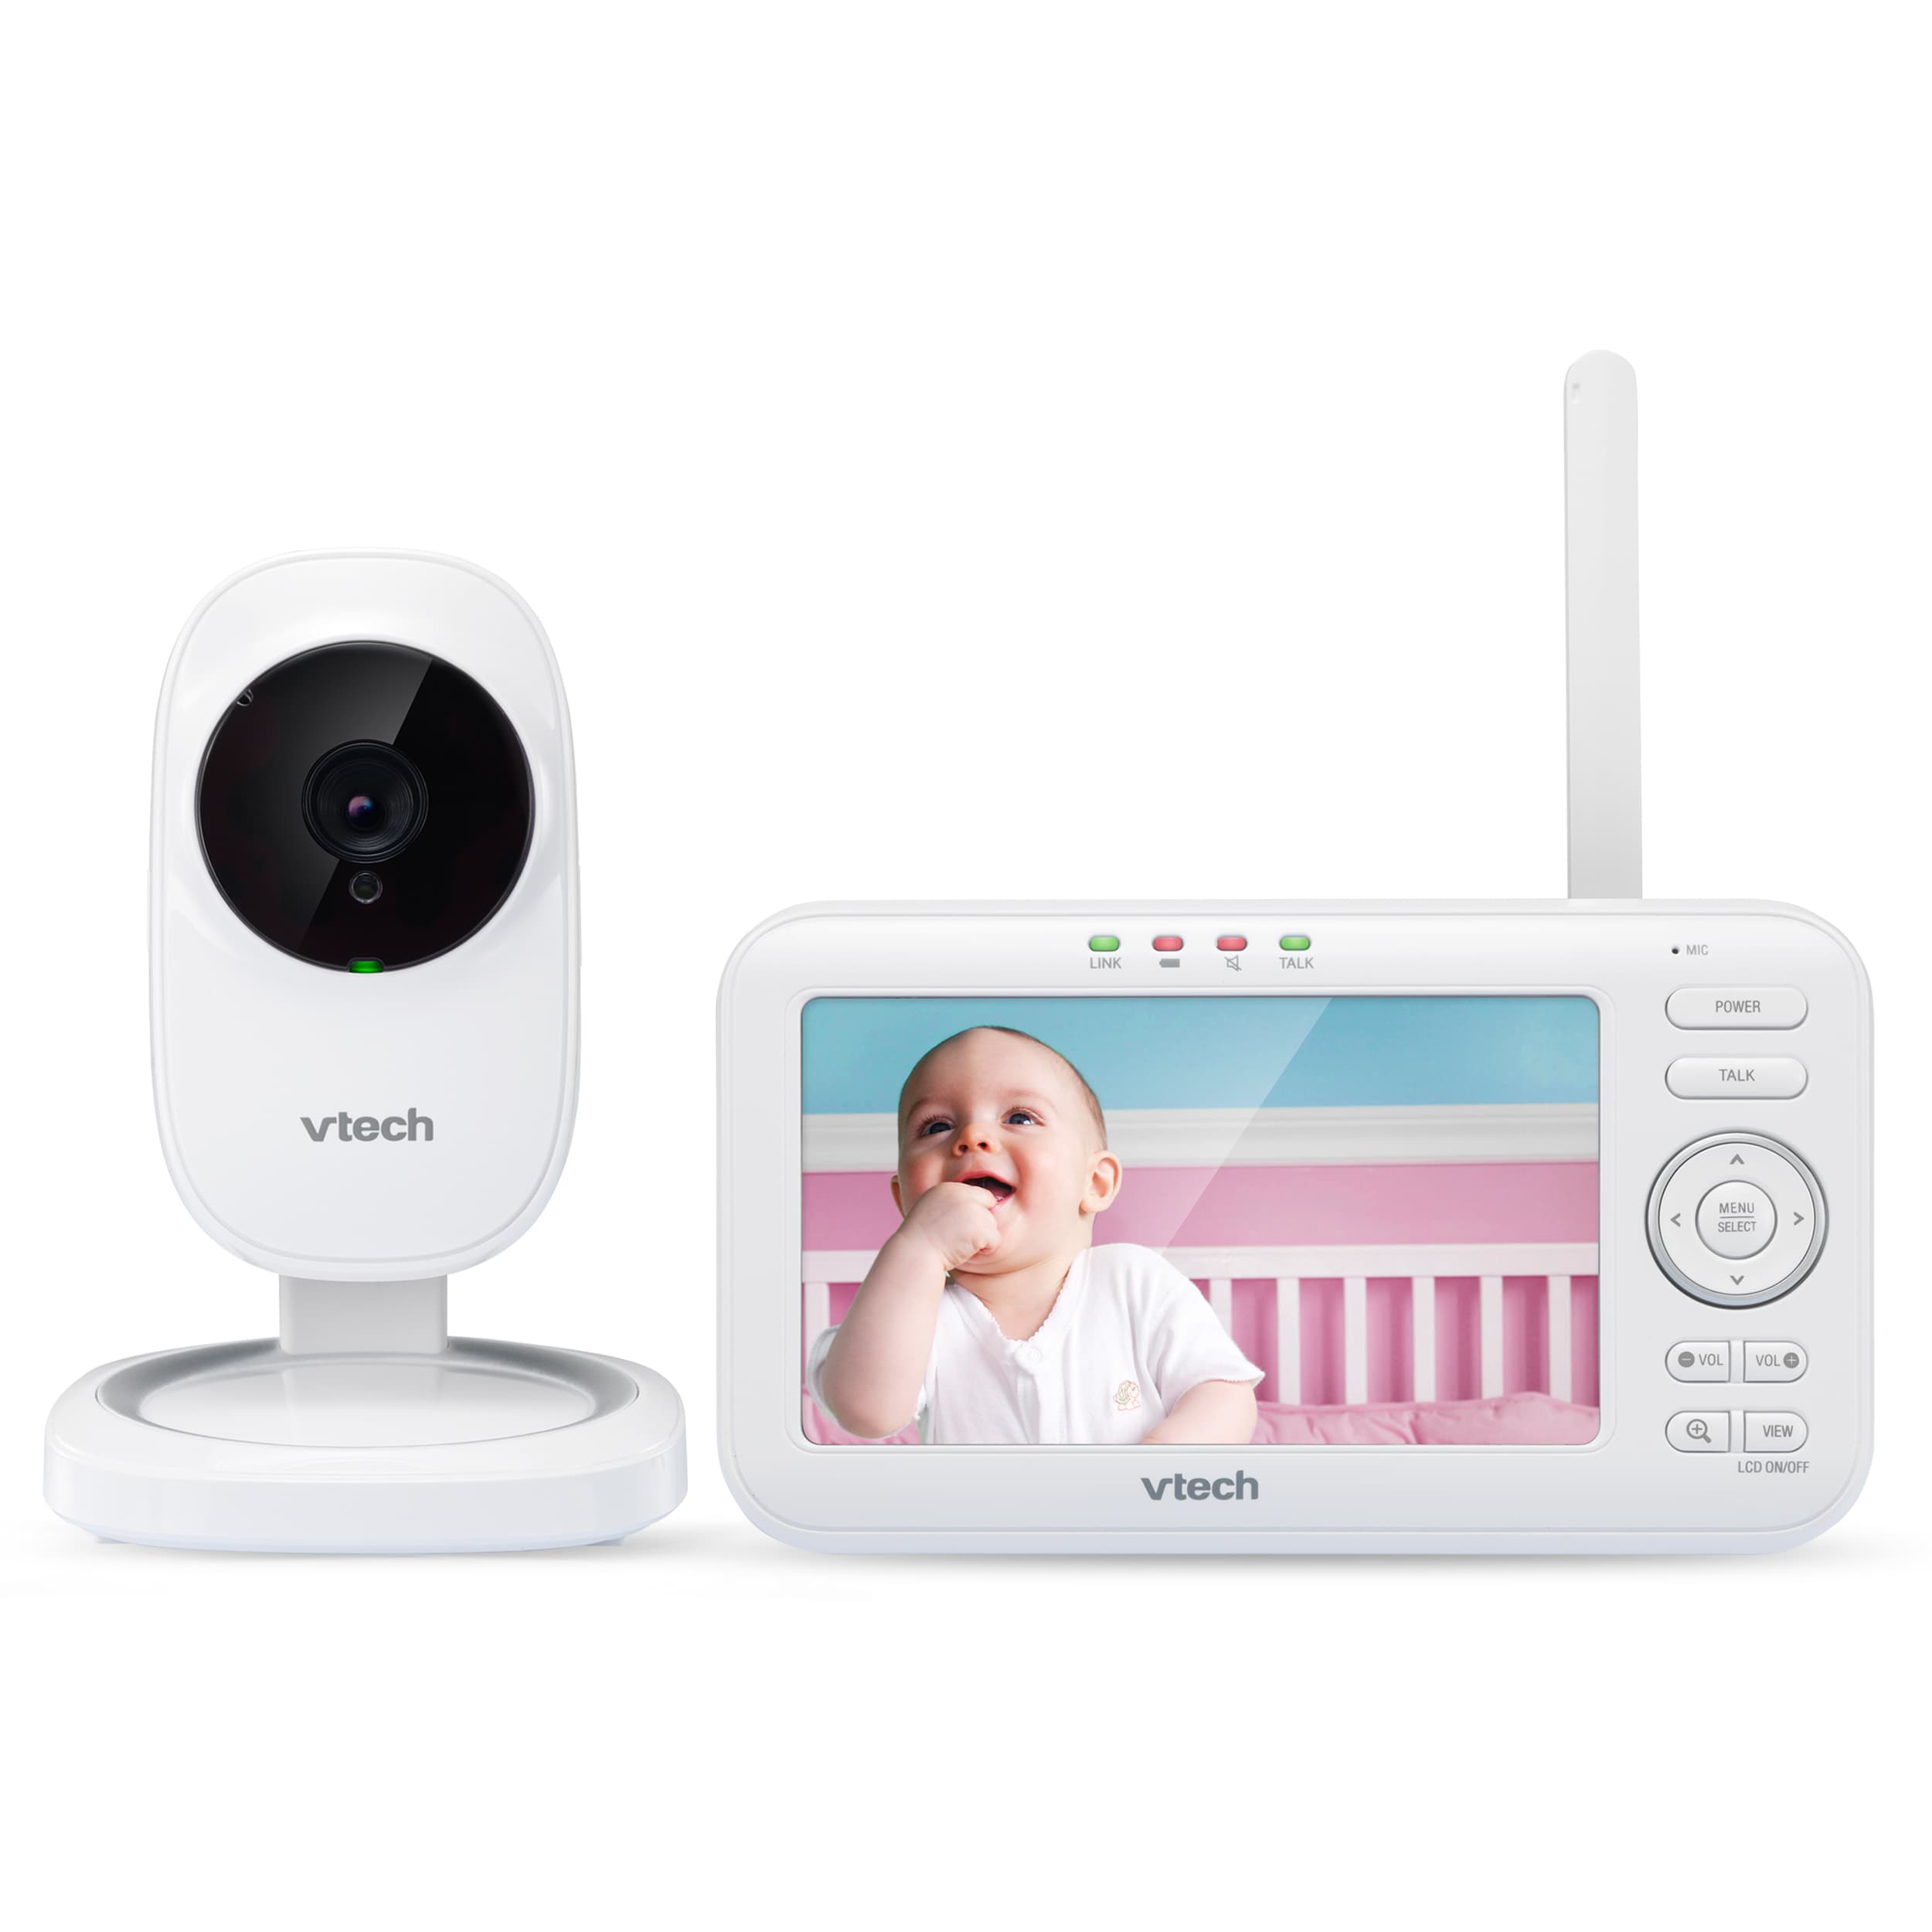 5" Digital Video Baby Monitor with Full-Color and Automatic Night Vision